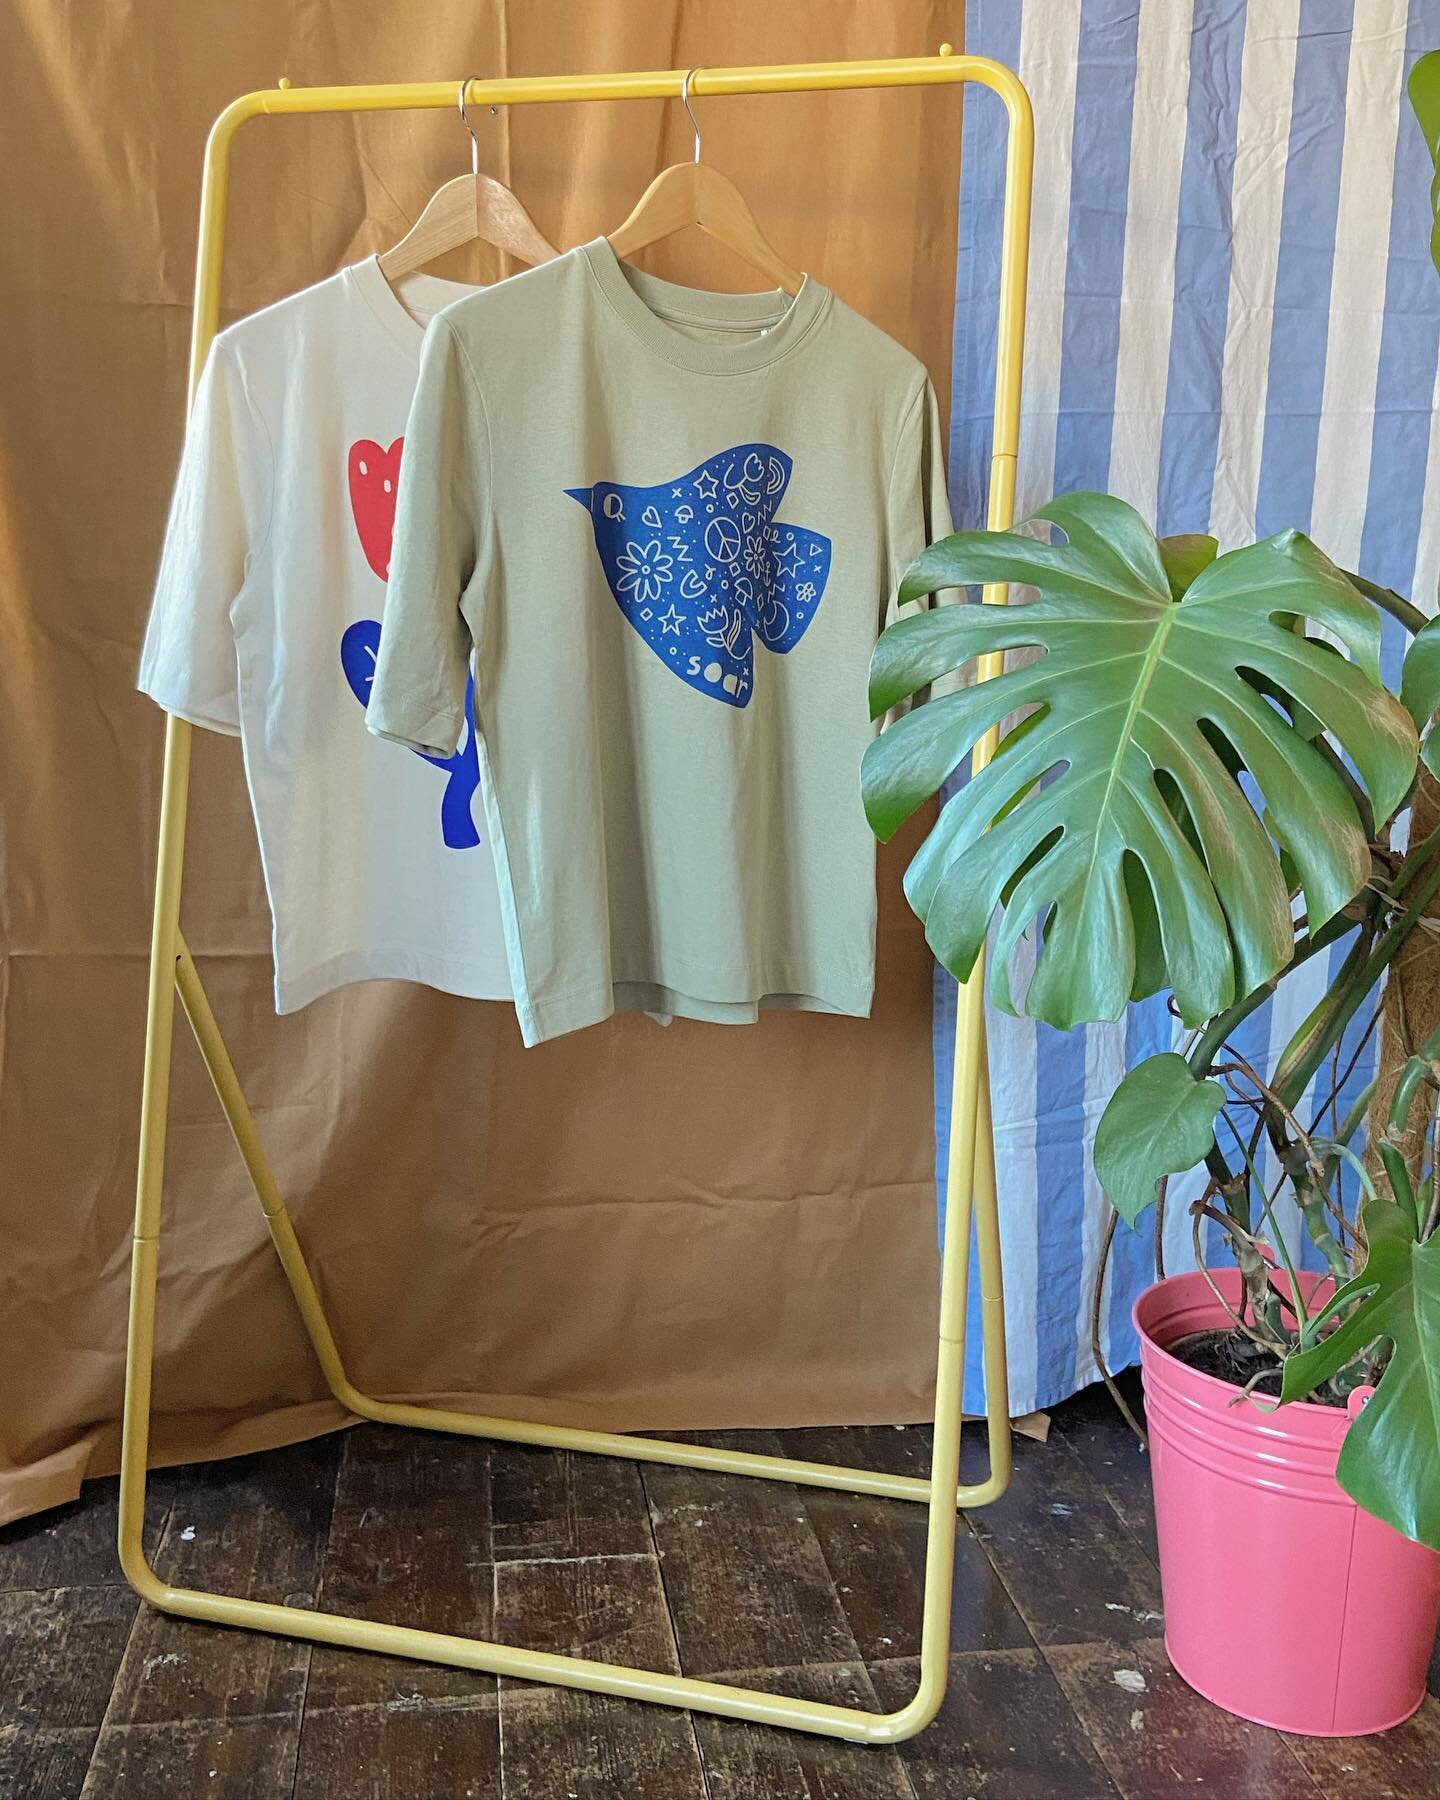 Instead of a Black Friday sale I thought I&rsquo;d take the opportunity to release something new. Hand printed by me with my trusty silk screens onto beautiful slouchy, comfy t-shirts. A boxy cut and a longer arm length so super flattering (much nice